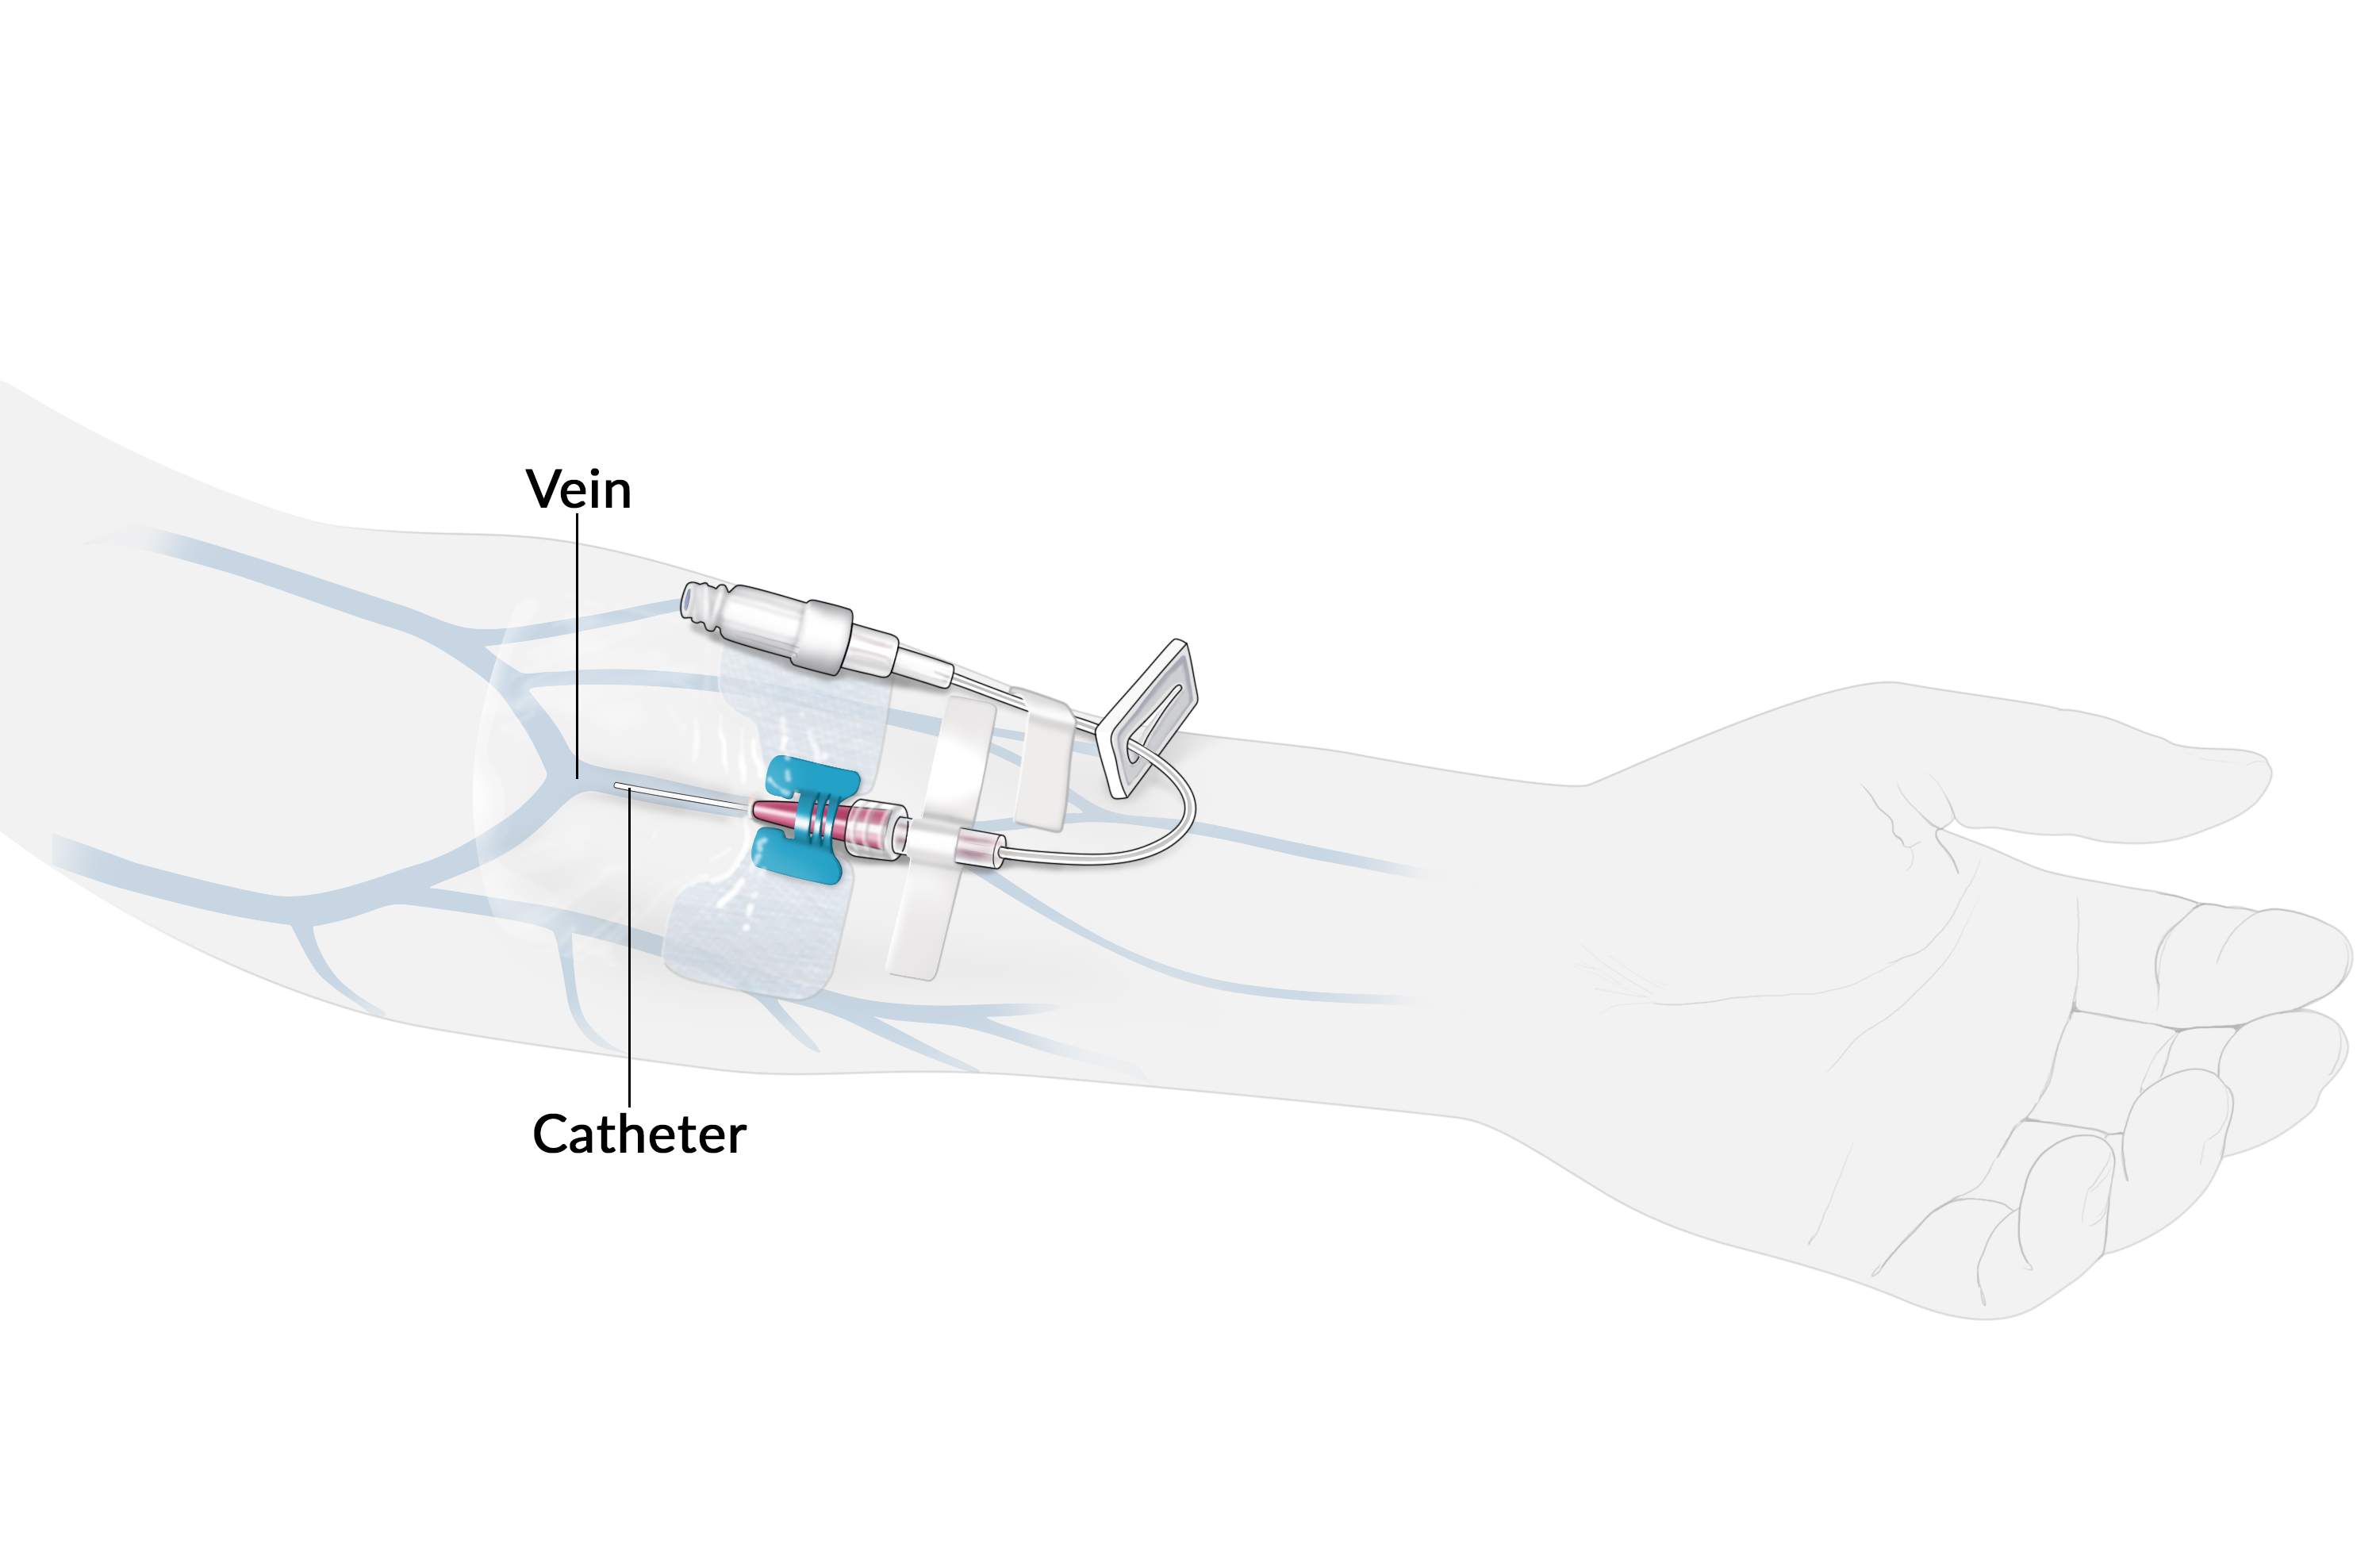 Peripheral venous catheter: An illustration of a peripheral venous catheter shows a tube inserted in a vein in an arm. 